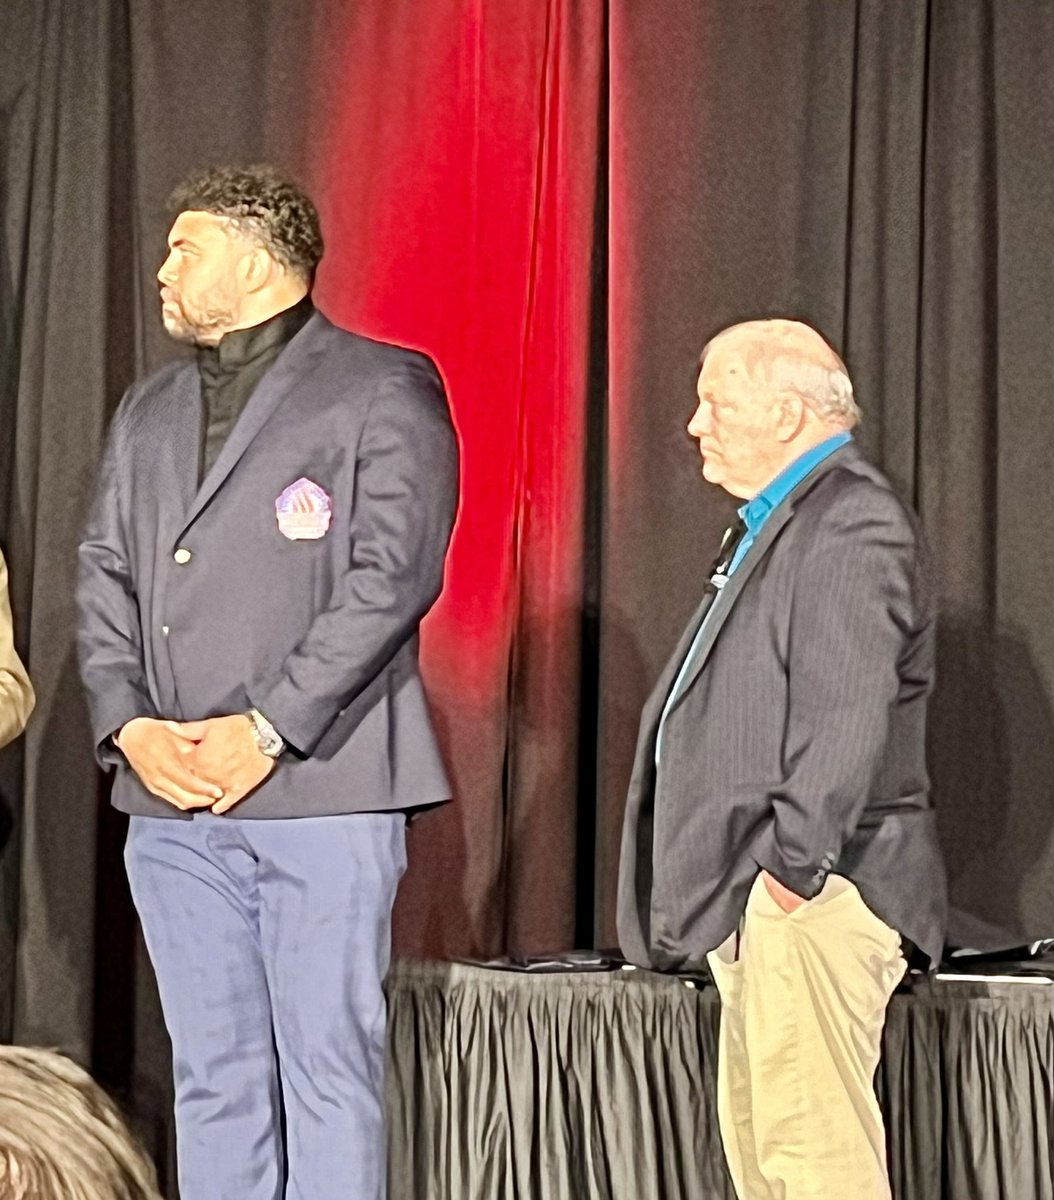 Last night was another amazing evening as @CamHeyward was inducted into the Gwinnett County Sports HOF. He is now in the company of many legendary people who have significantly impacted the world of sports. 
His high school coach, Blair Armstrong, presented him. 
#proudmom